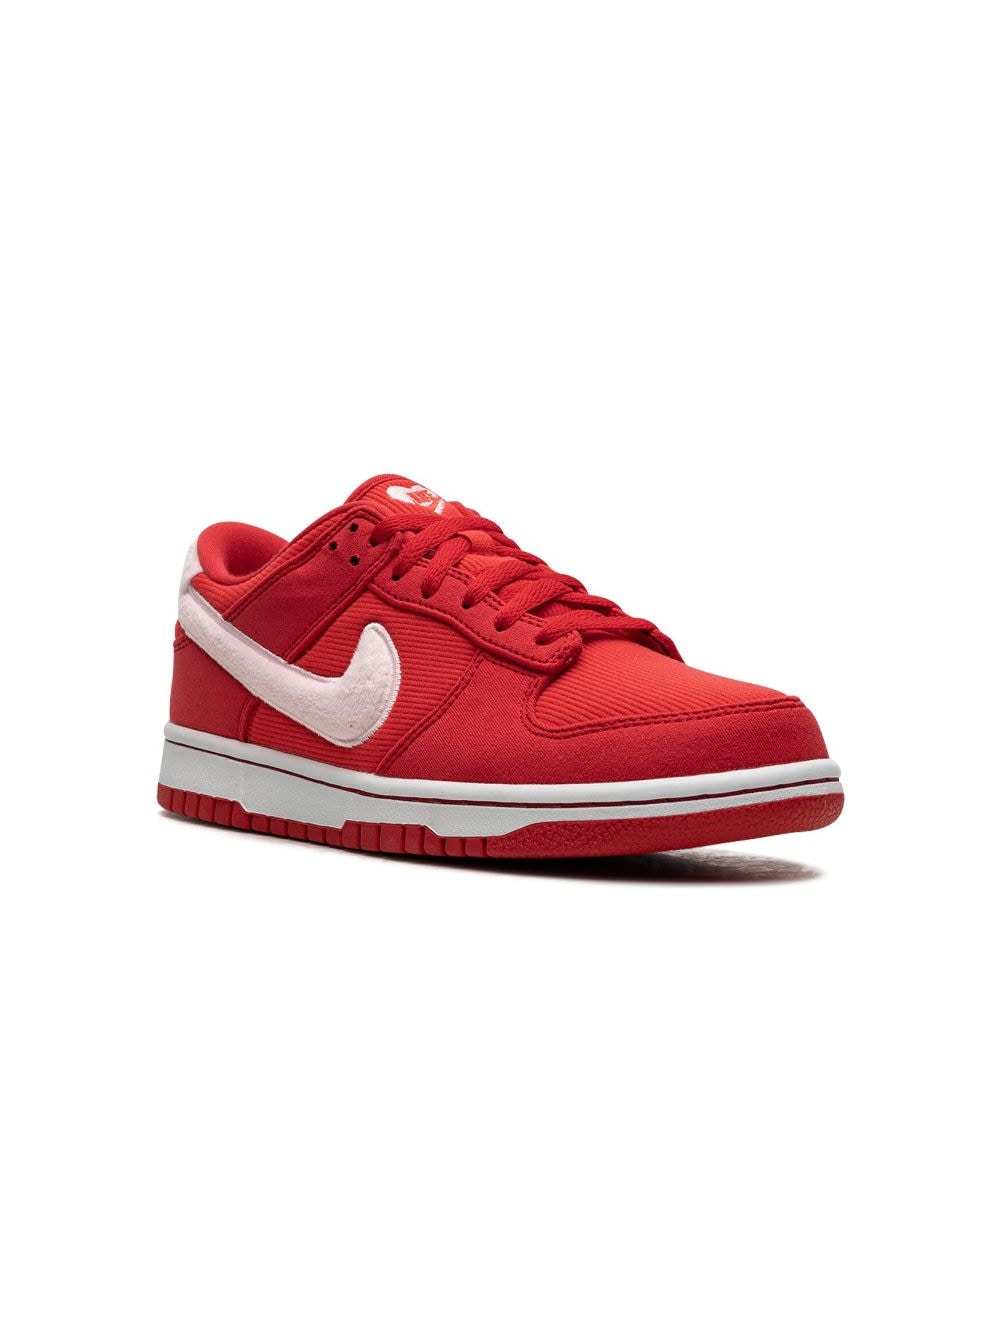 Nike Kids Dunk Low "Valentine's Day Solemates" sneakers - Red von Nike Kids